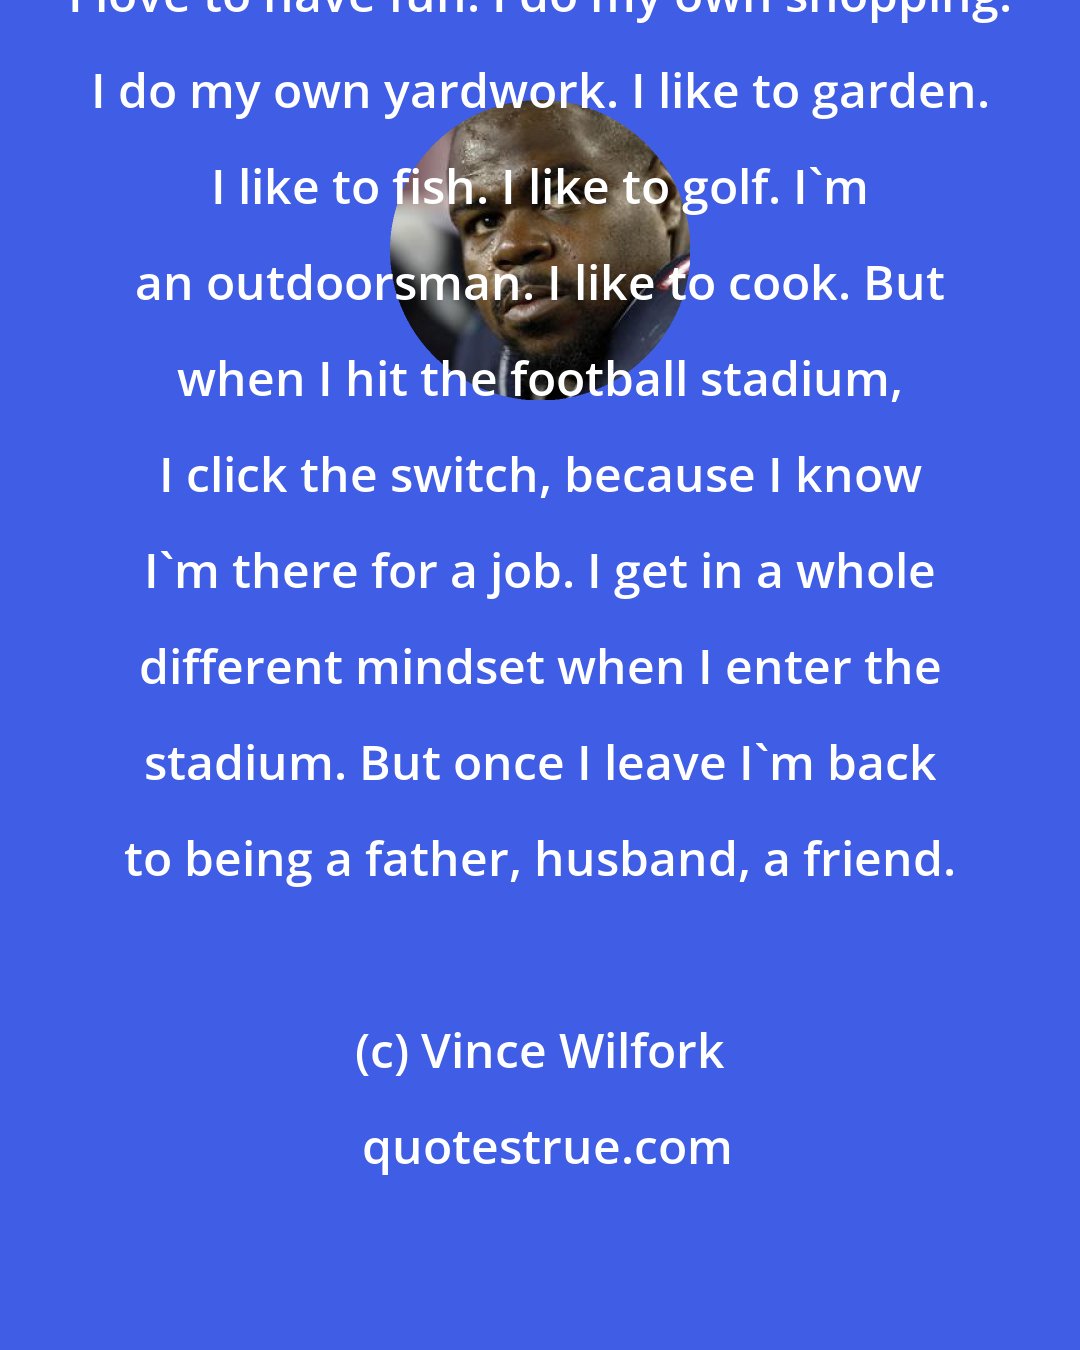 Vince Wilfork: I love to have fun. I do my own shopping. I do my own yardwork. I like to garden. I like to fish. I like to golf. I'm an outdoorsman. I like to cook. But when I hit the football stadium, I click the switch, because I know I'm there for a job. I get in a whole different mindset when I enter the stadium. But once I leave I'm back to being a father, husband, a friend.